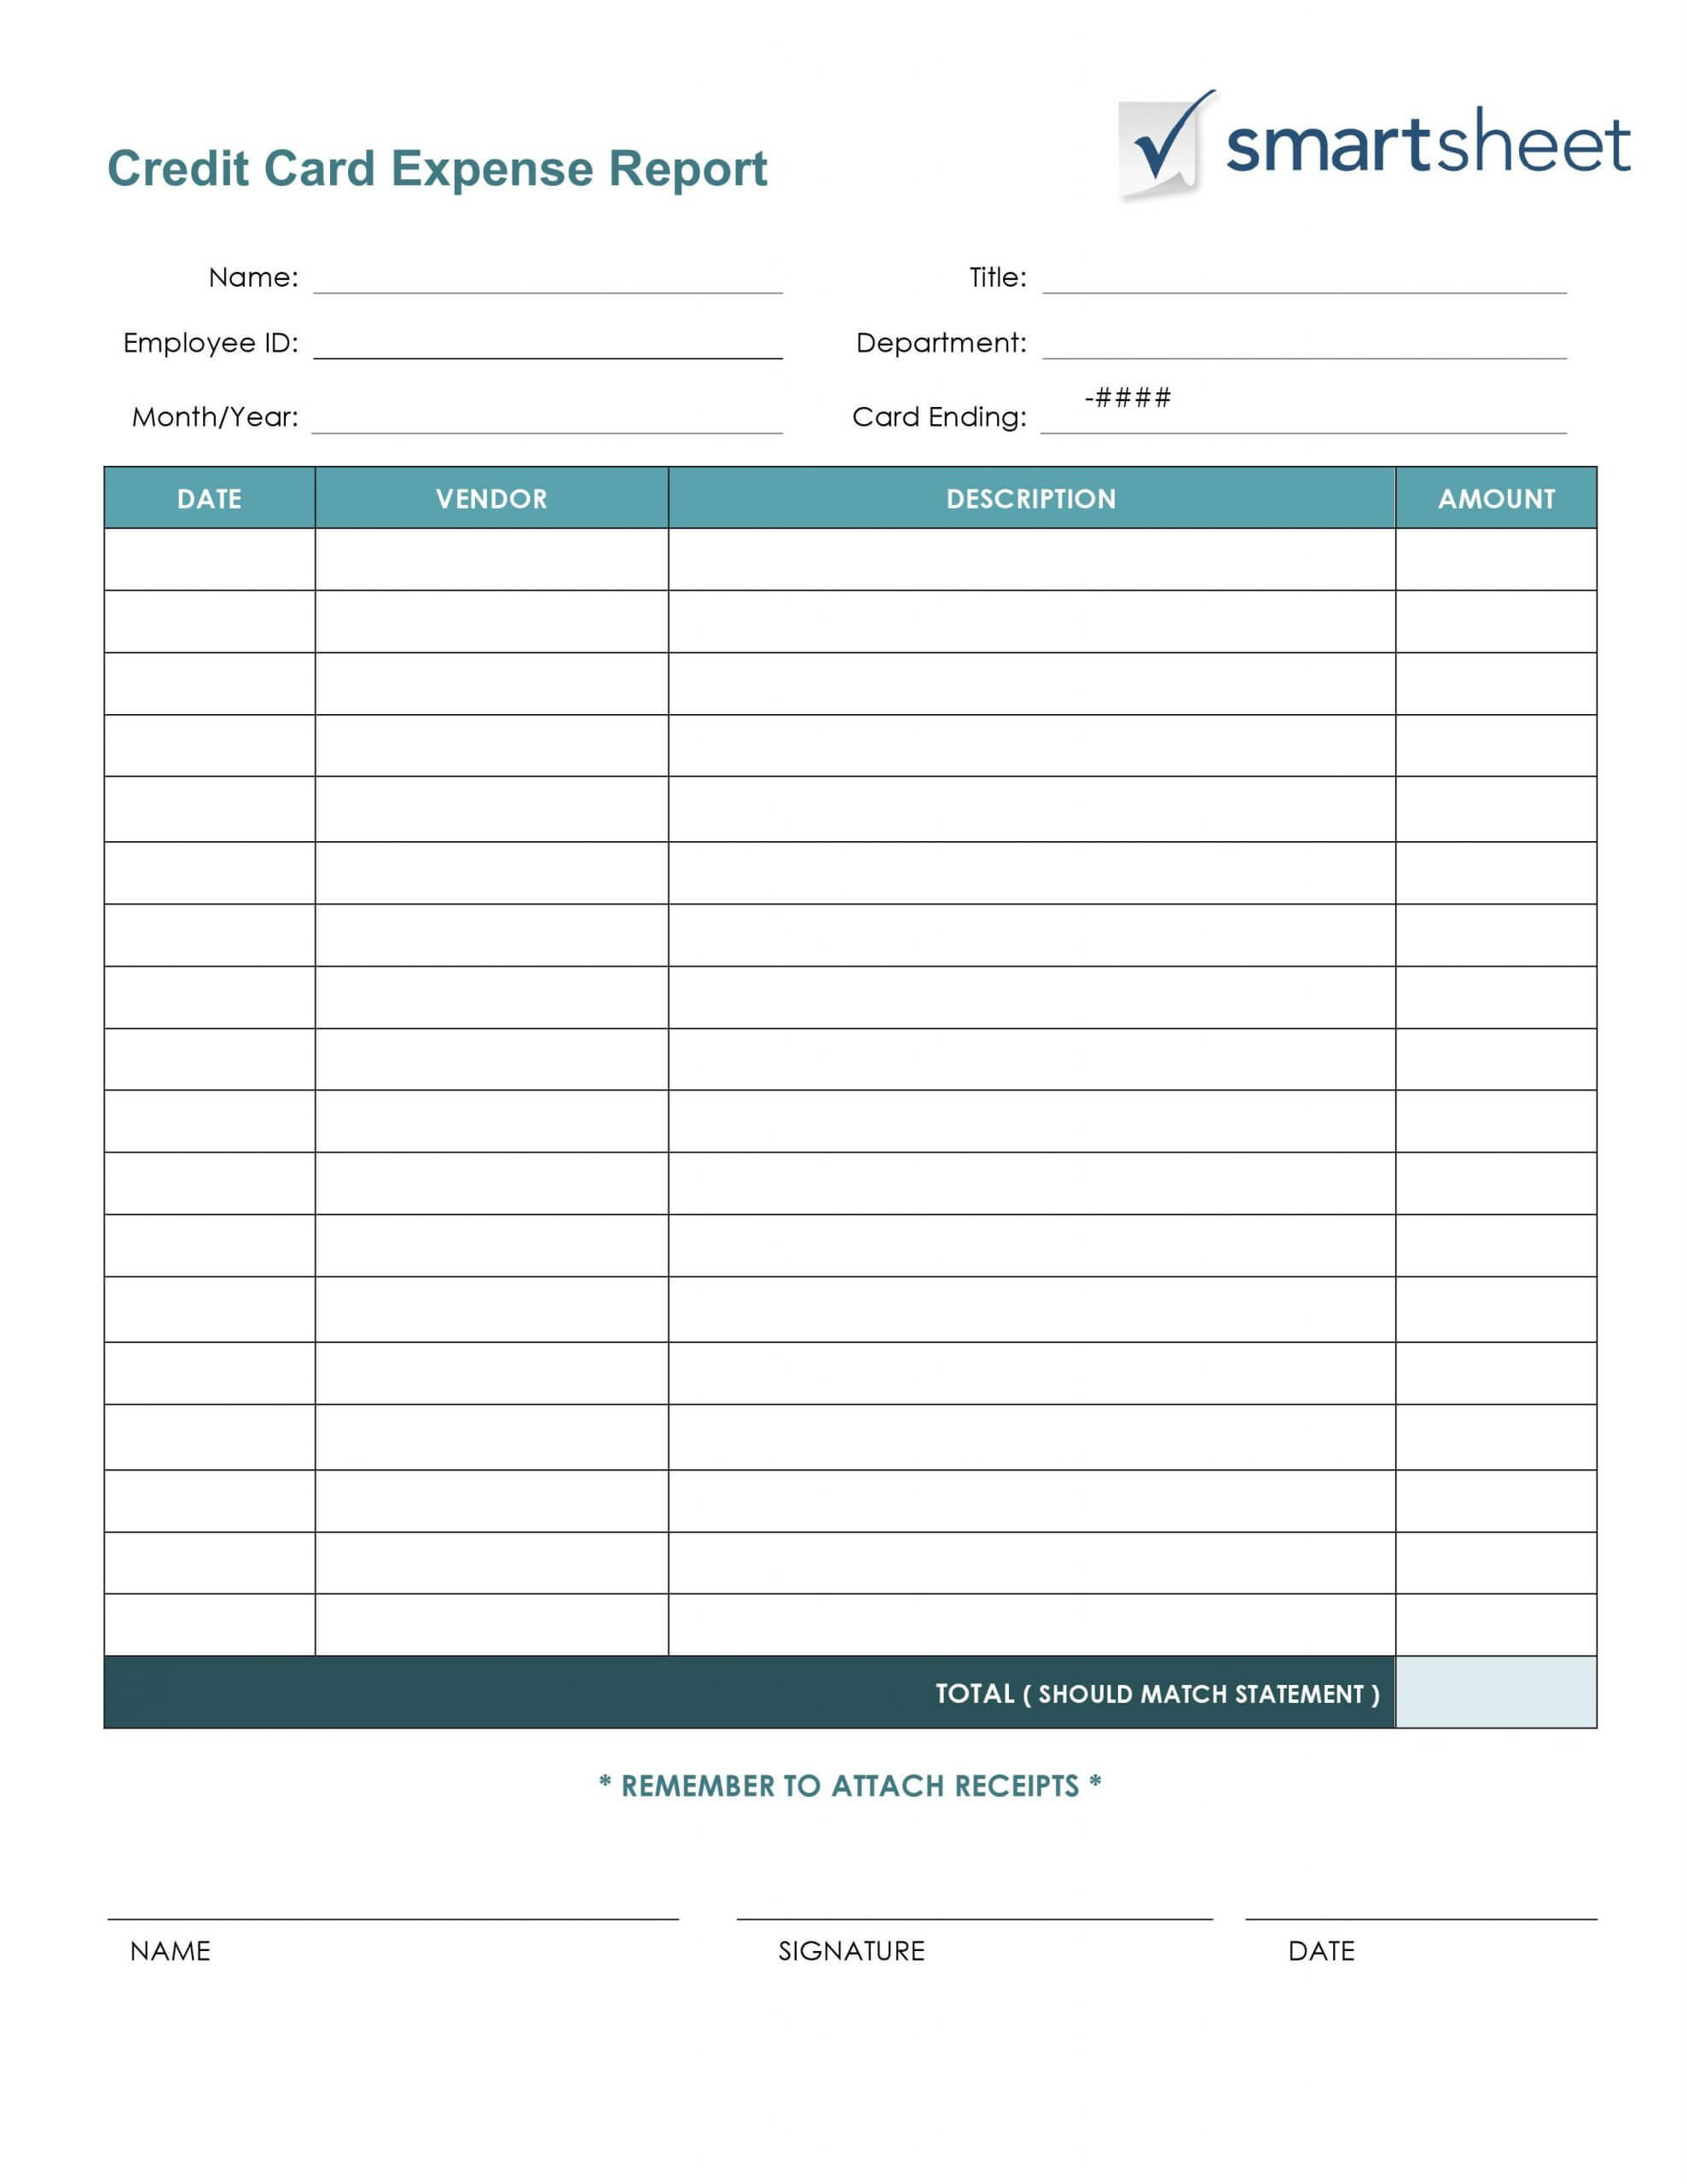 Credit Card Budget Spreadsheet Template Employee Expense With Regard To Credit Card Payment Spreadsheet Template